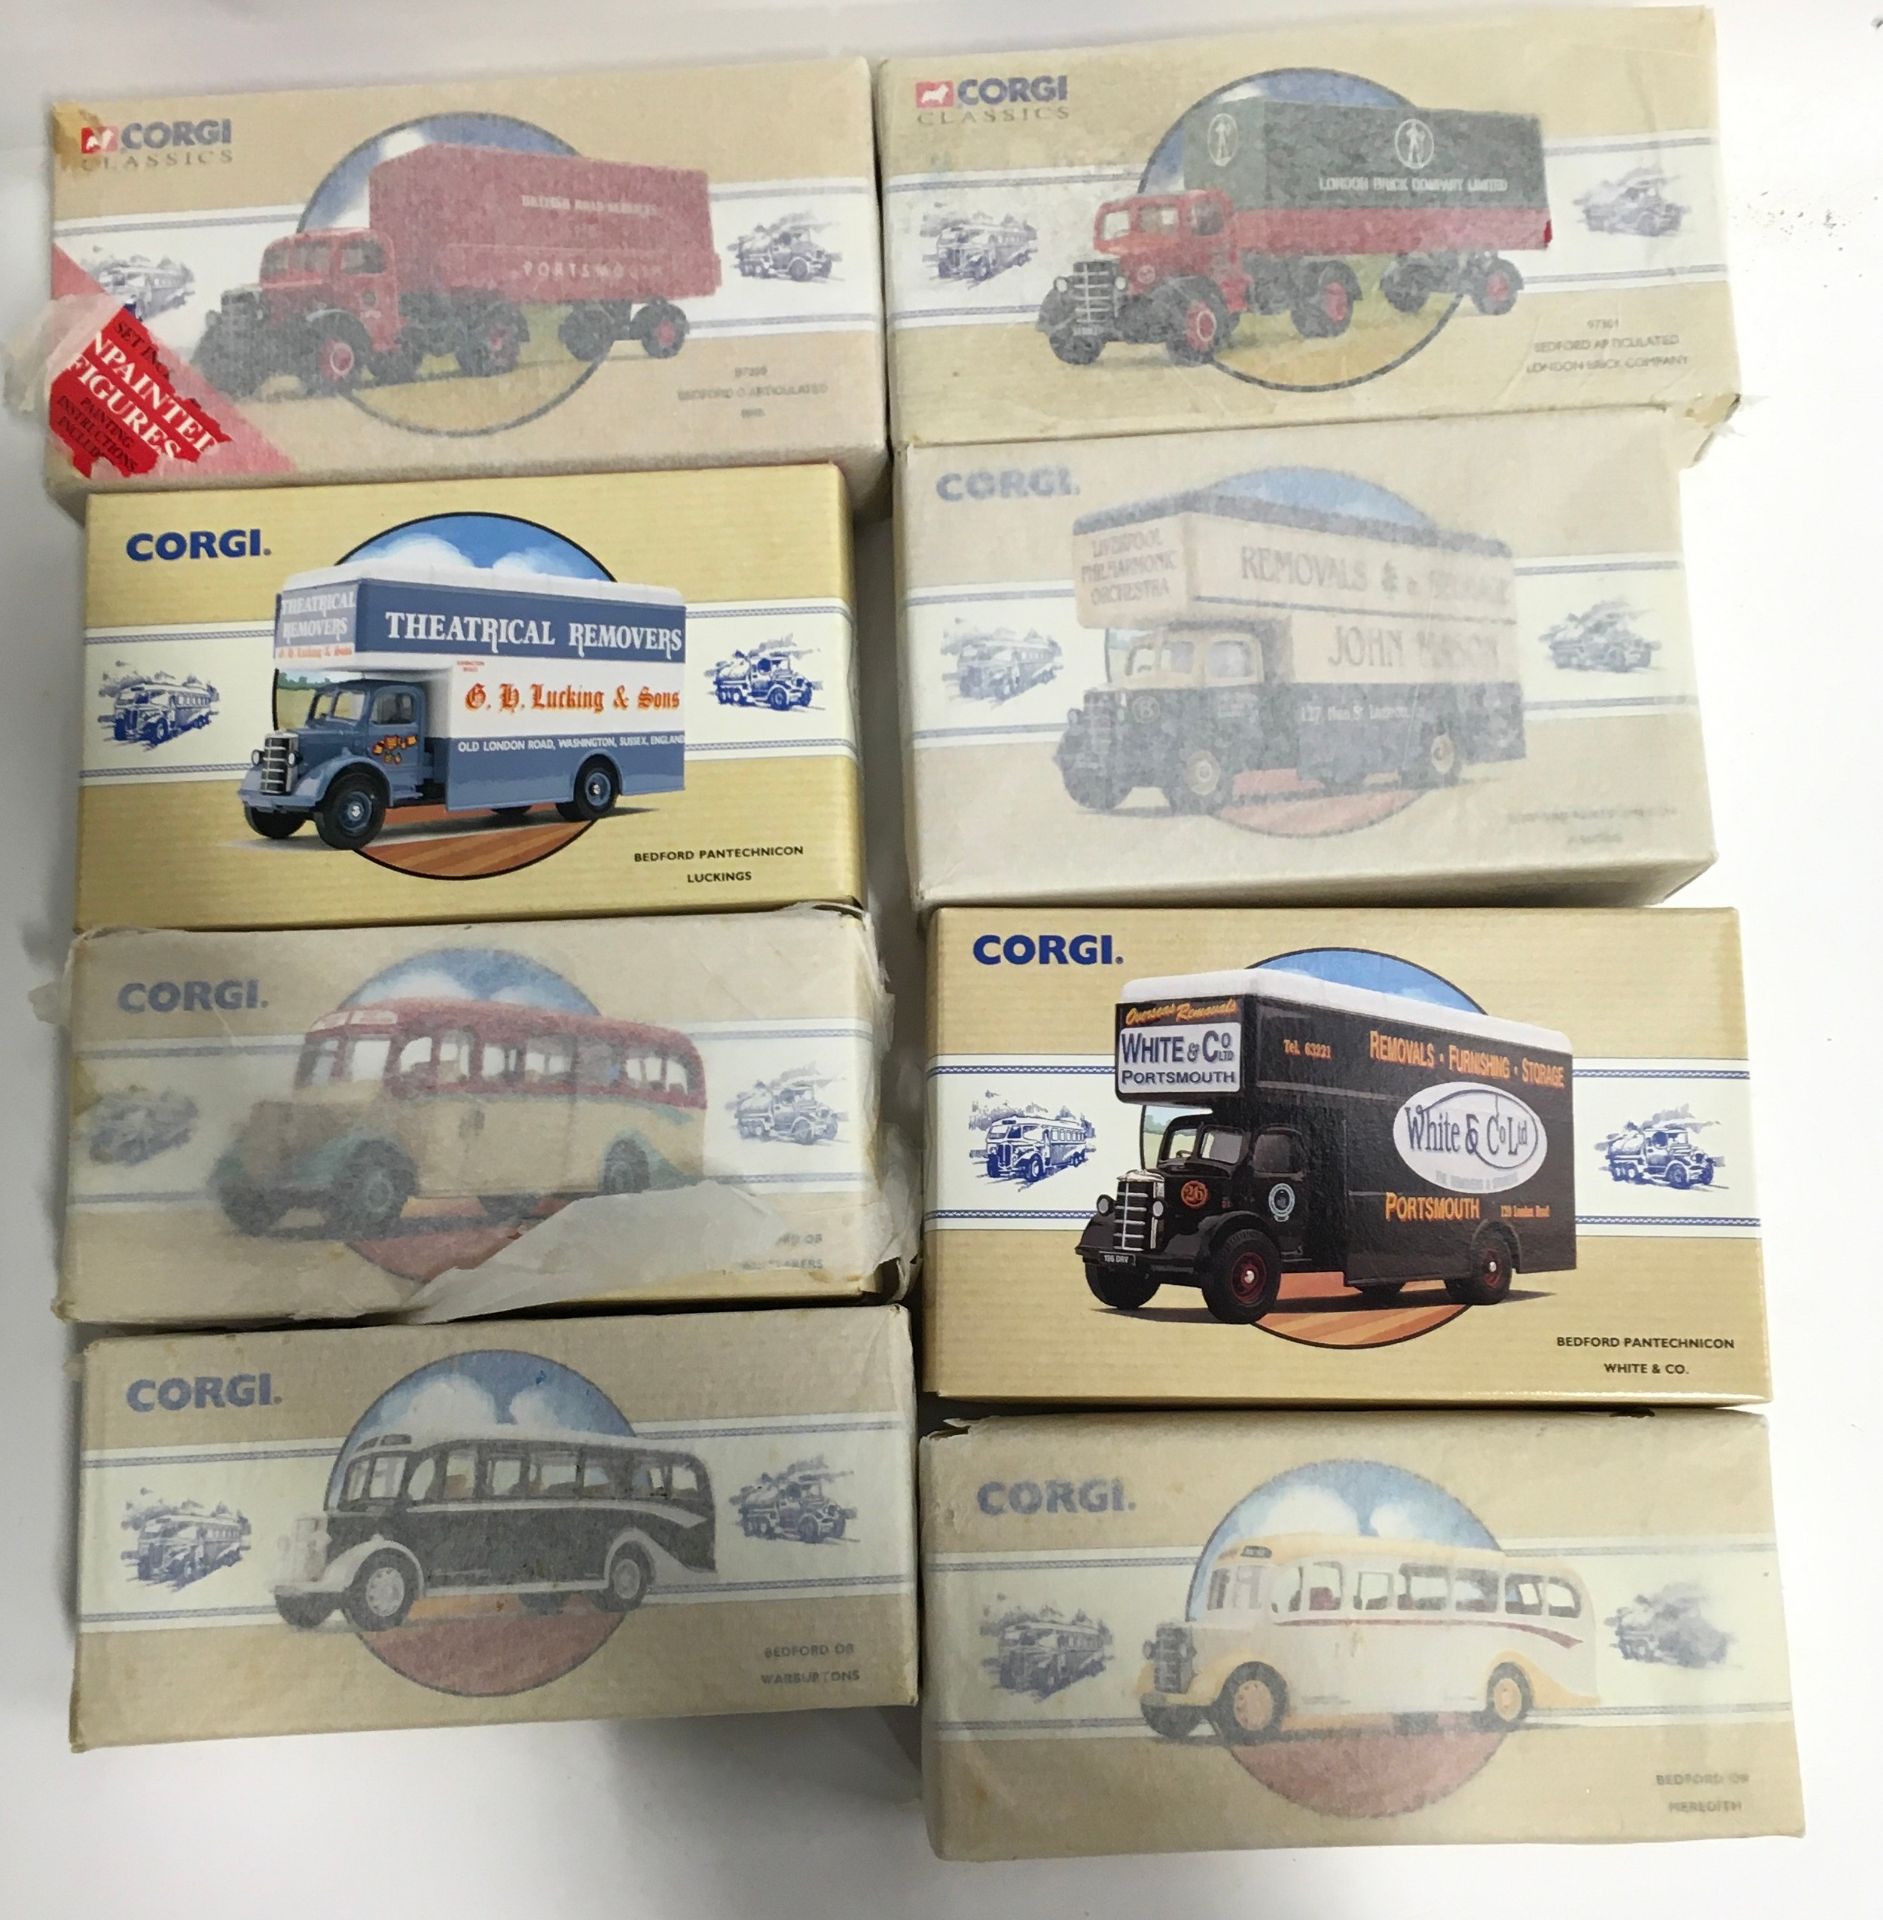 Corgi Classic Commercial group of models to include 97091 Bedford Pantechnicon Luckings, 97113